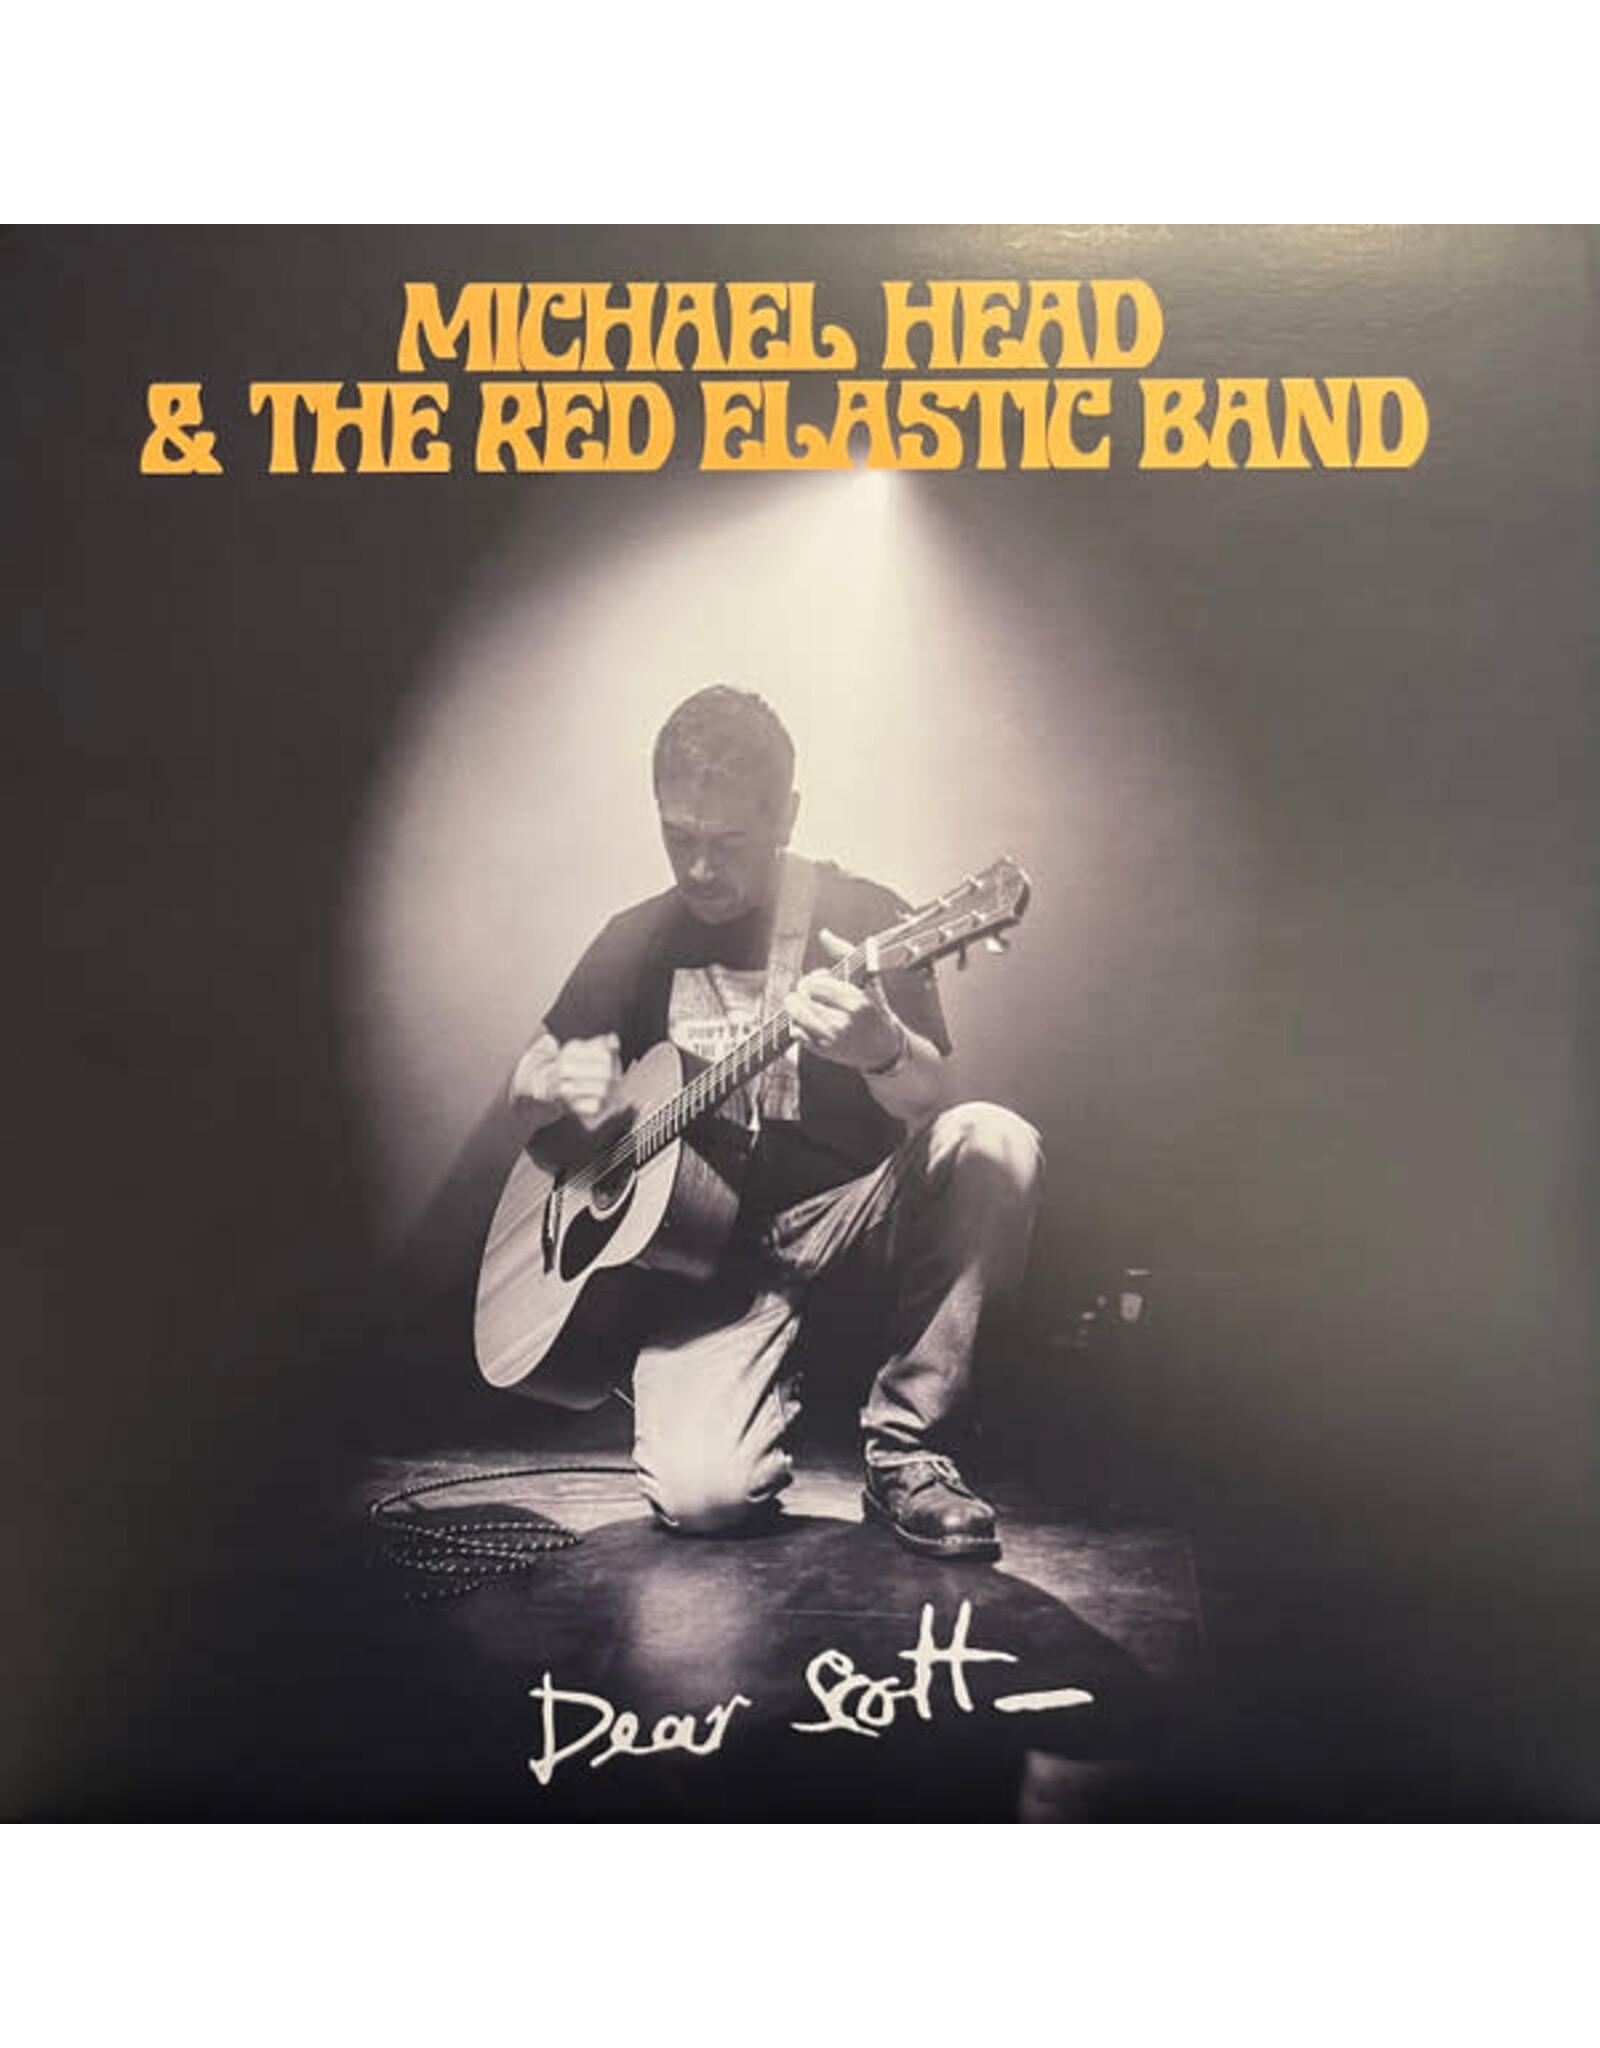 Head, Michael and the Red Elastic Band - Dear Scott LP